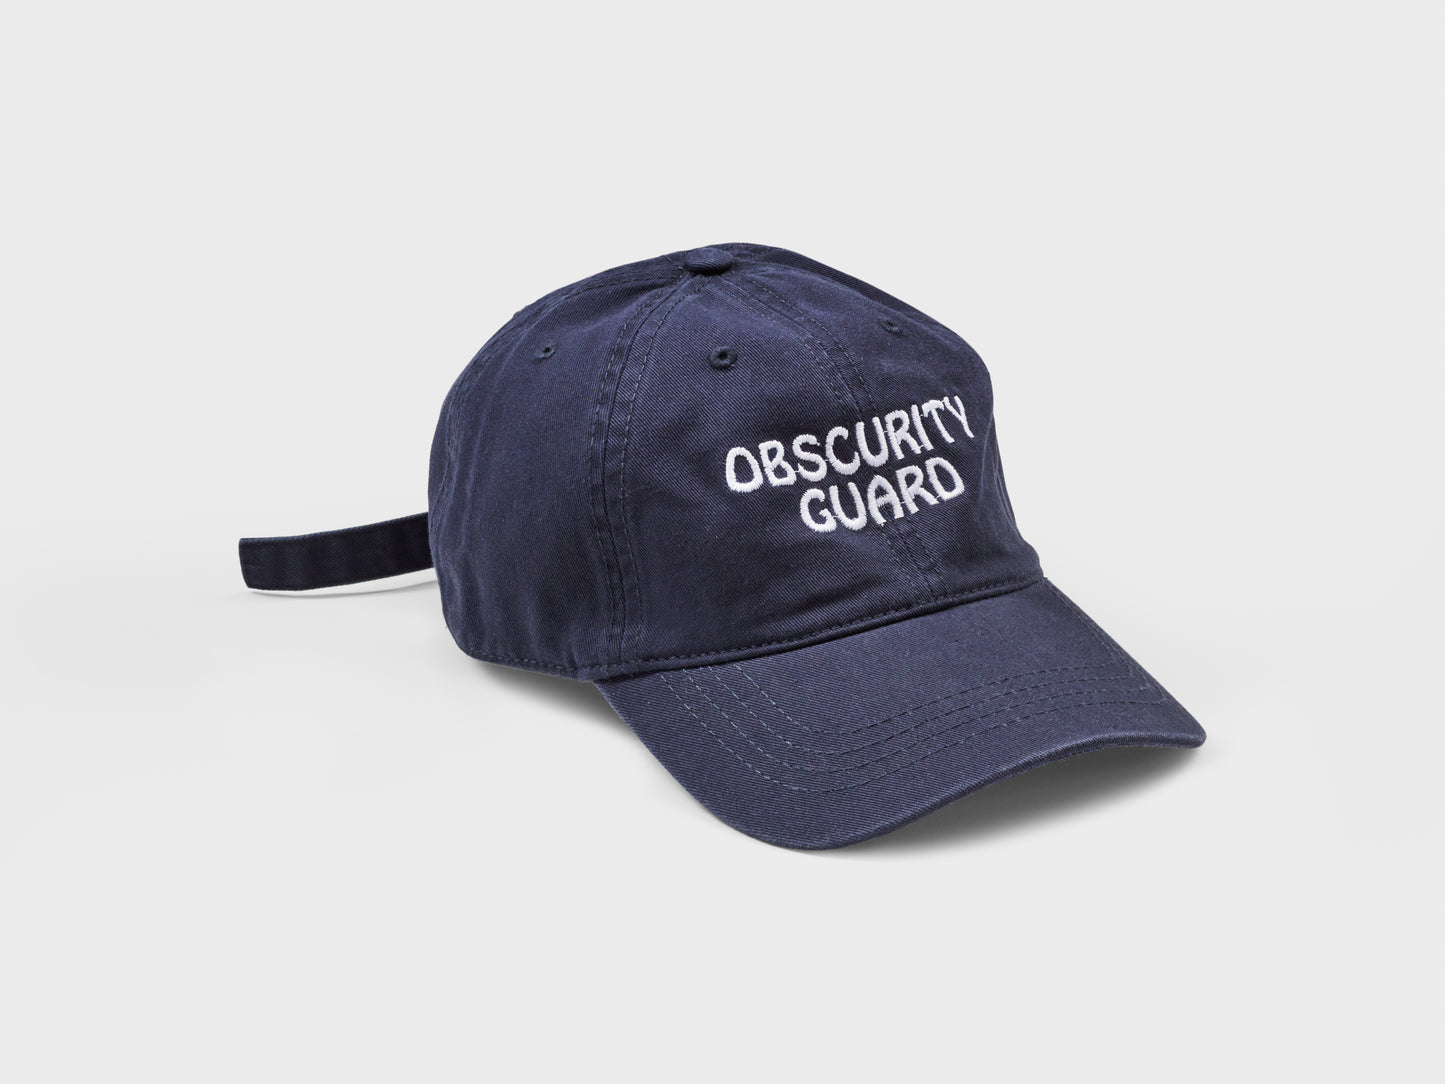 OBSCURITY GUARD Hat